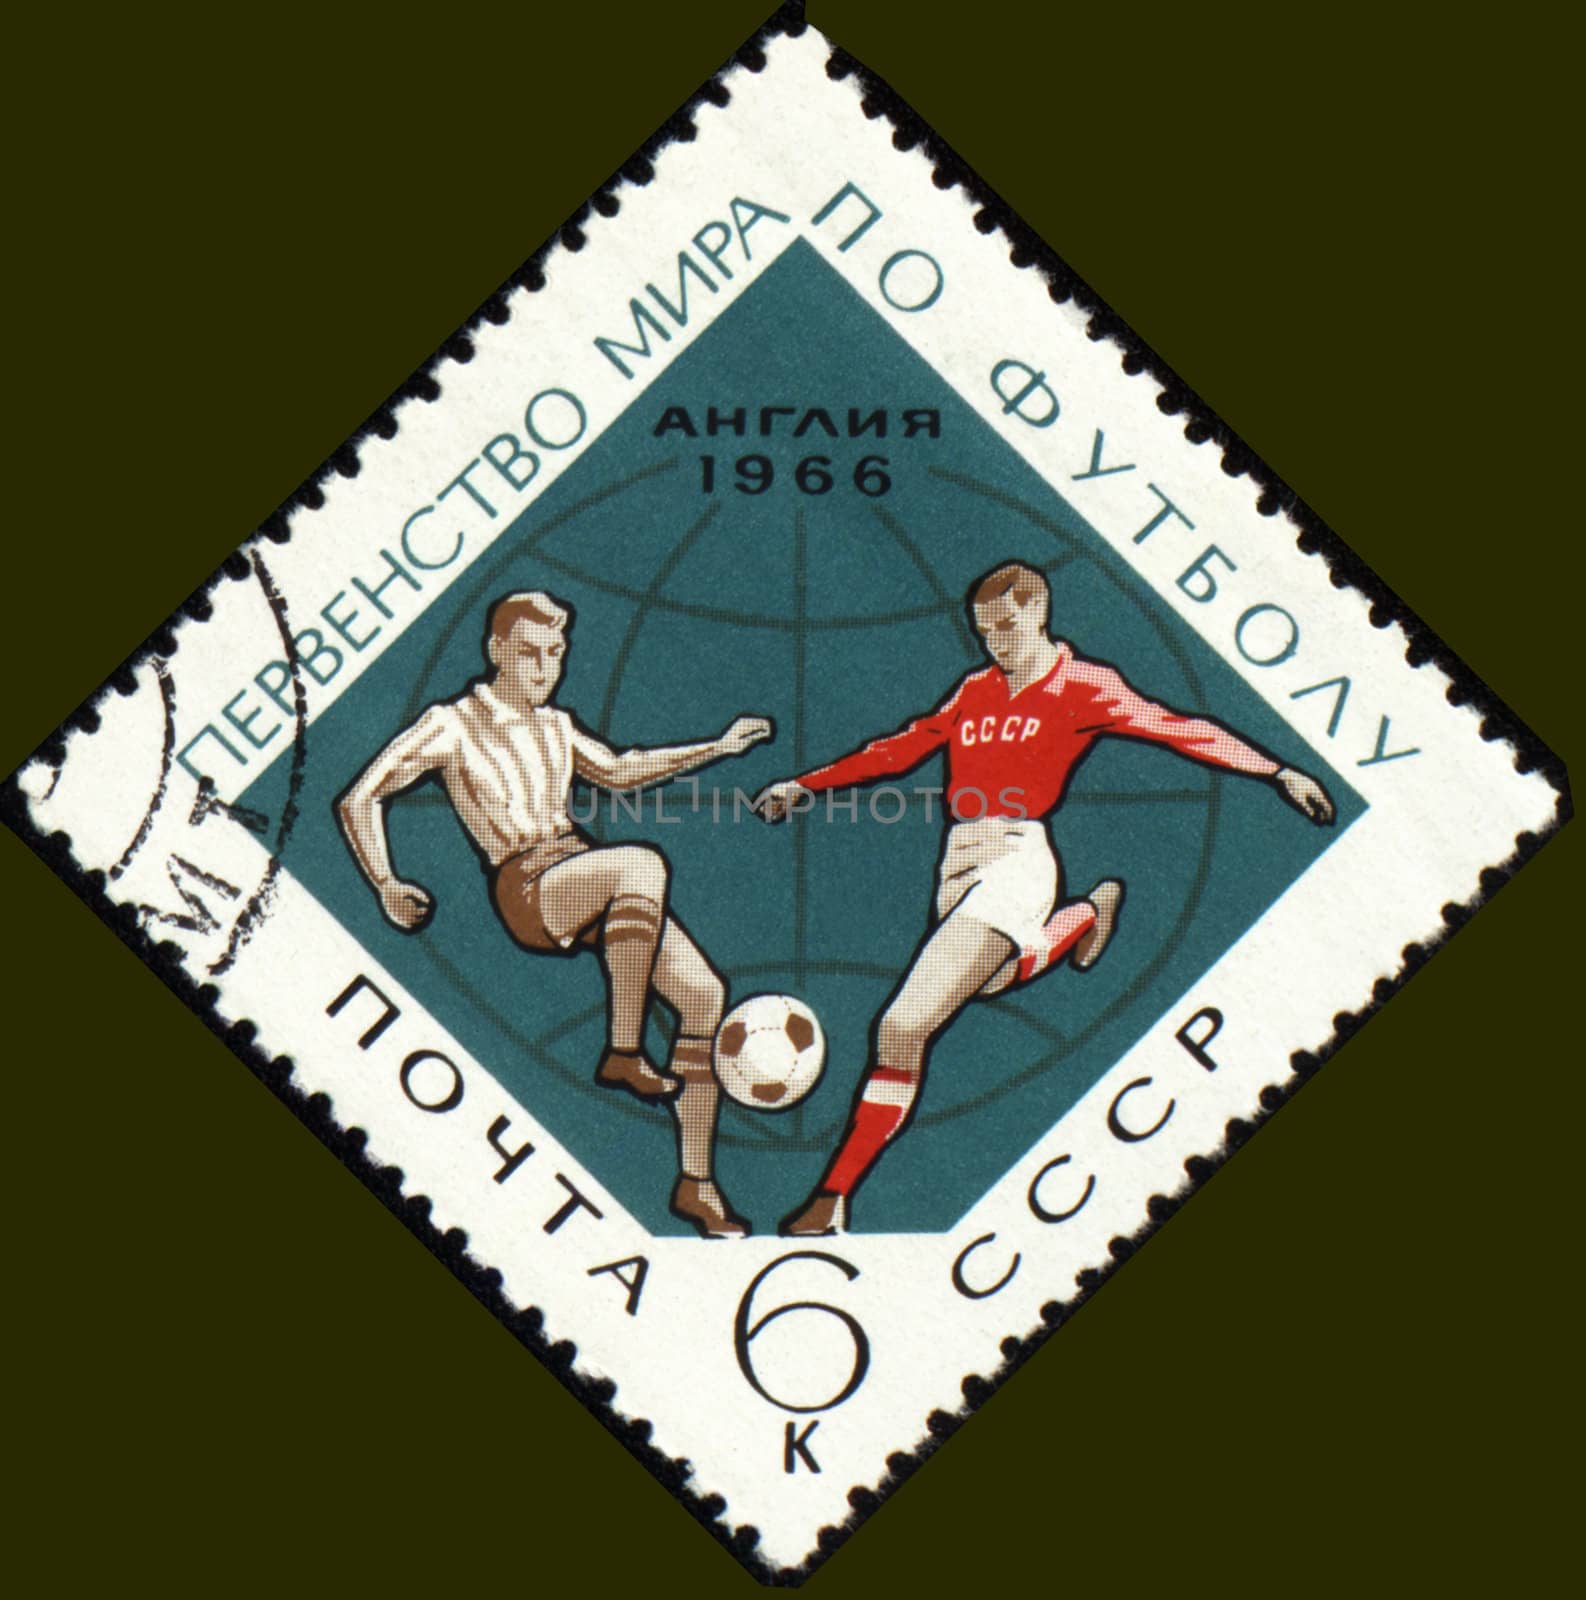 USSR - CIRCA 1966: A stamp printed in USSR shows World Football Championship - London-1966, circa 1966